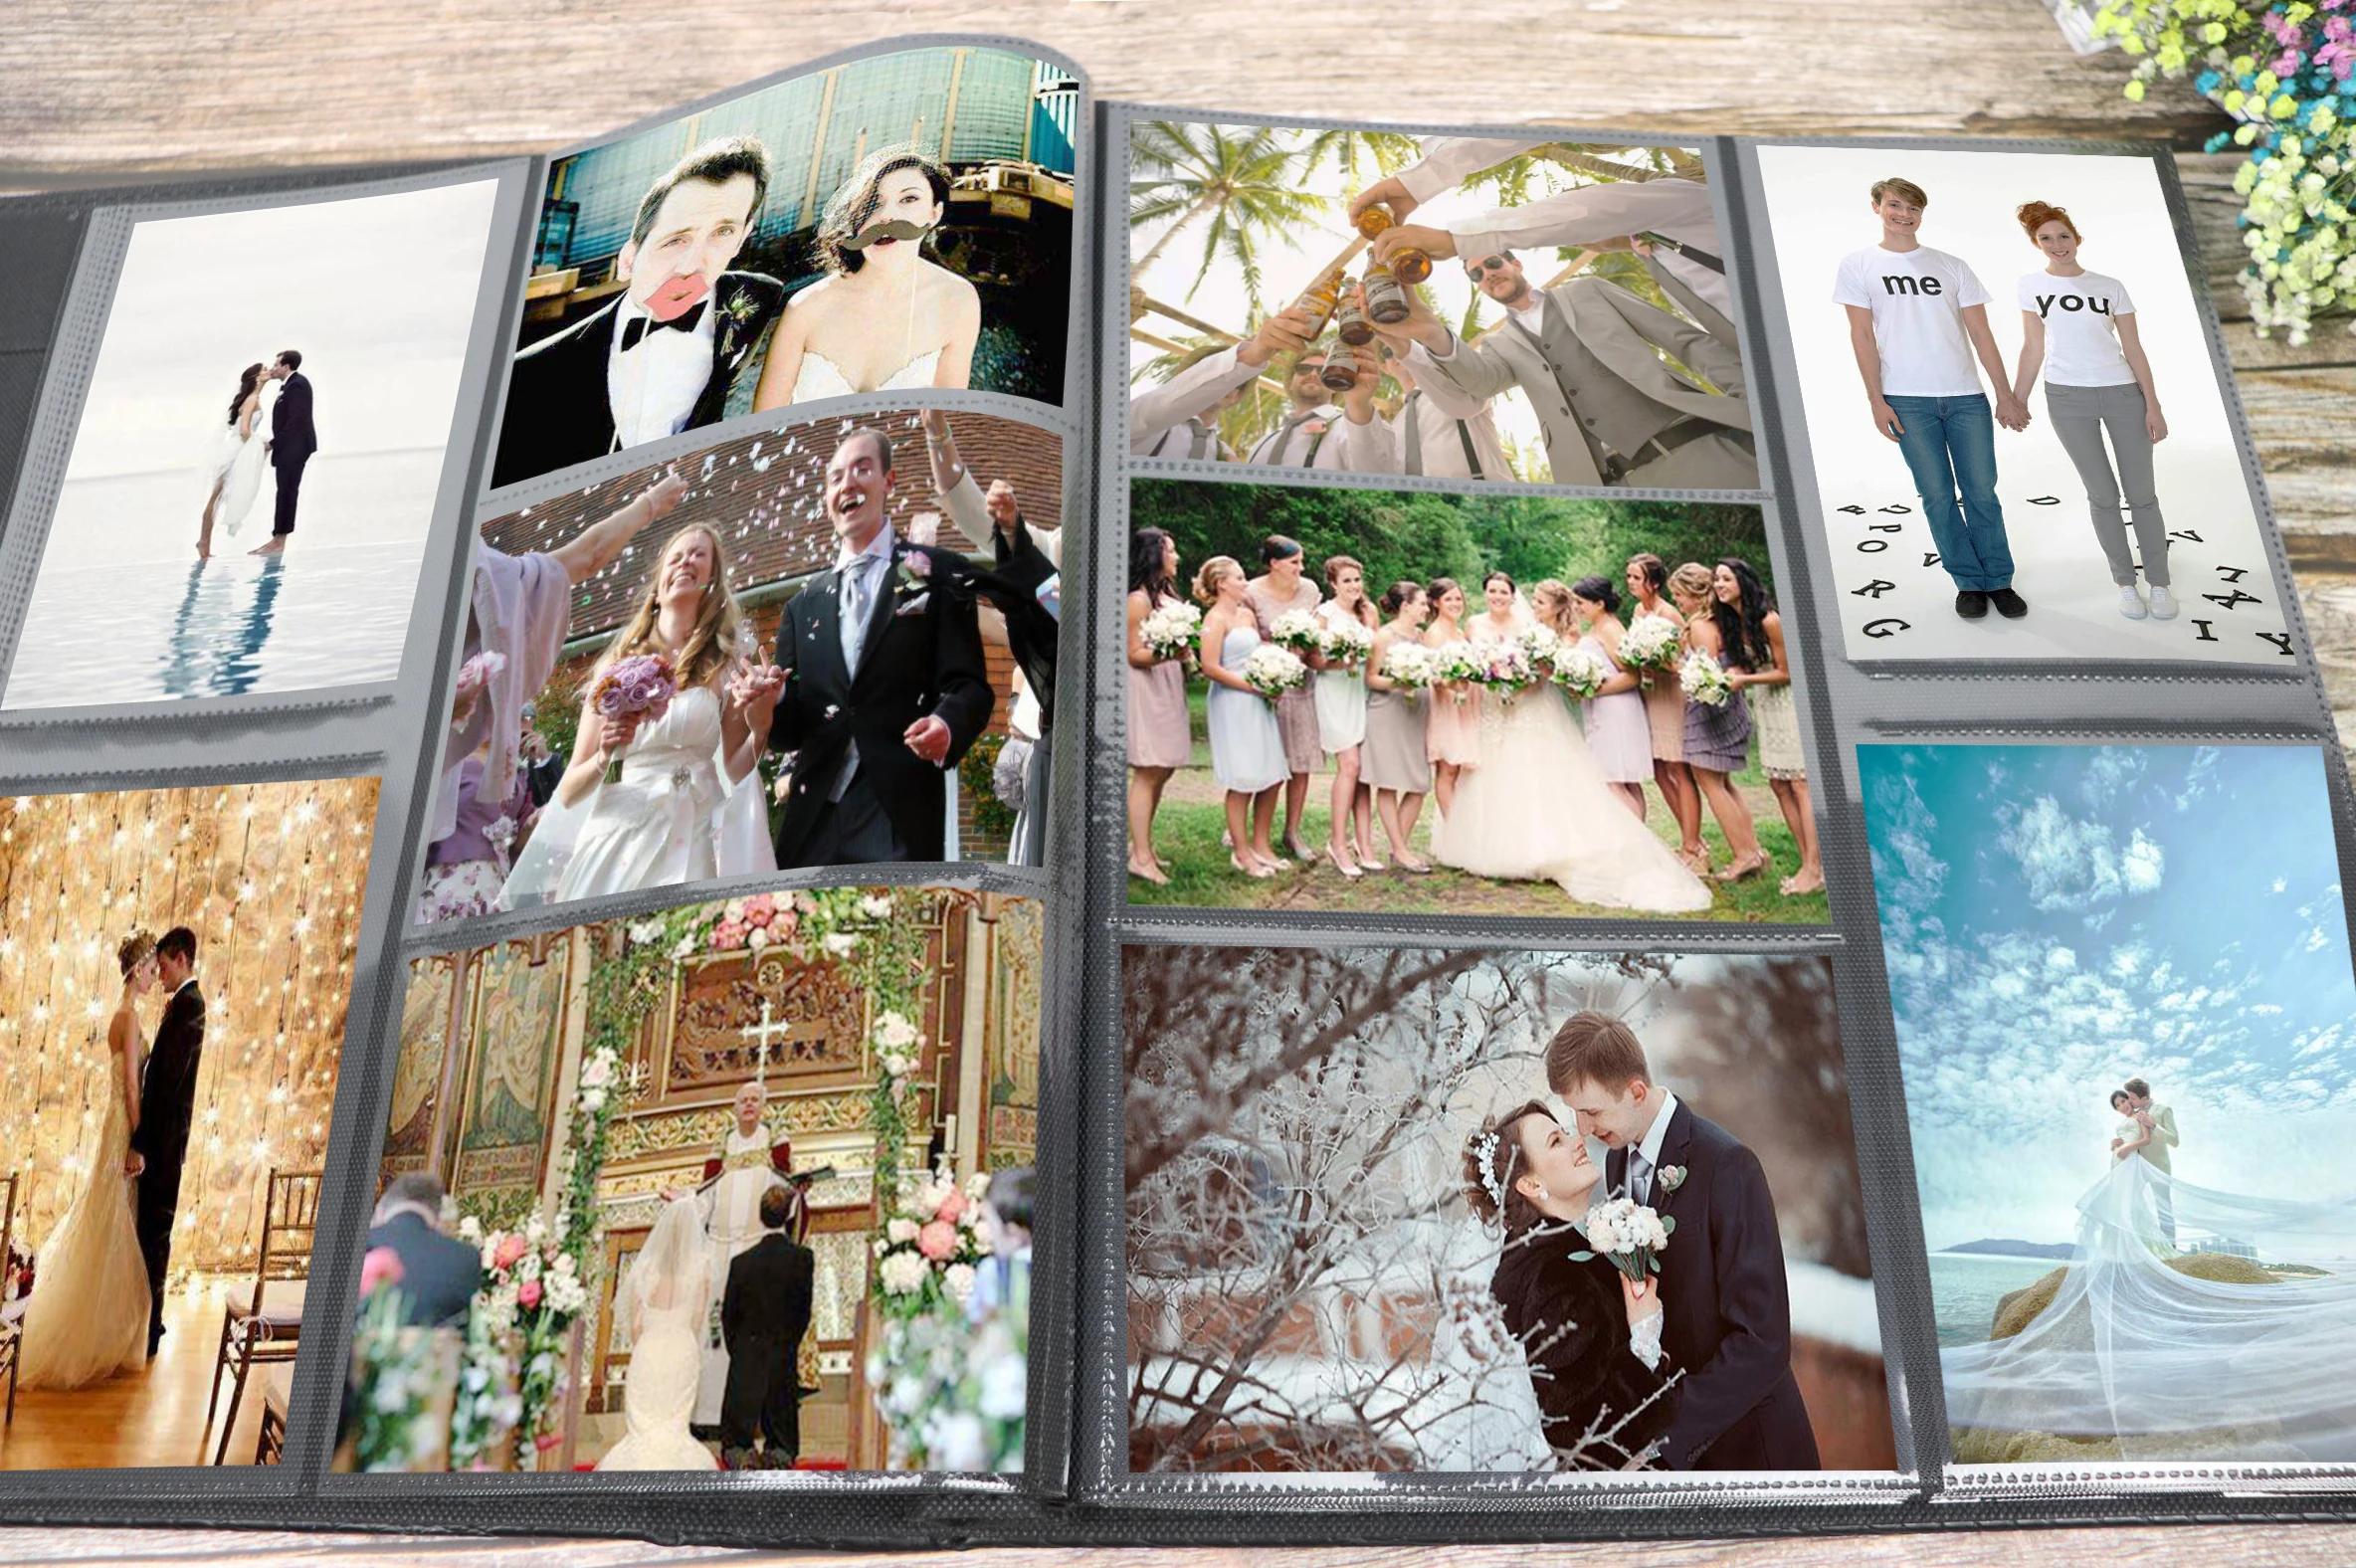 Artmag Photo Album 4x6 600 Photos Red Large Capacity Wedding Family Leather Cover Picture Albums Holds 600 Horizontal and Vertical 4x6 Photos with Black Pages